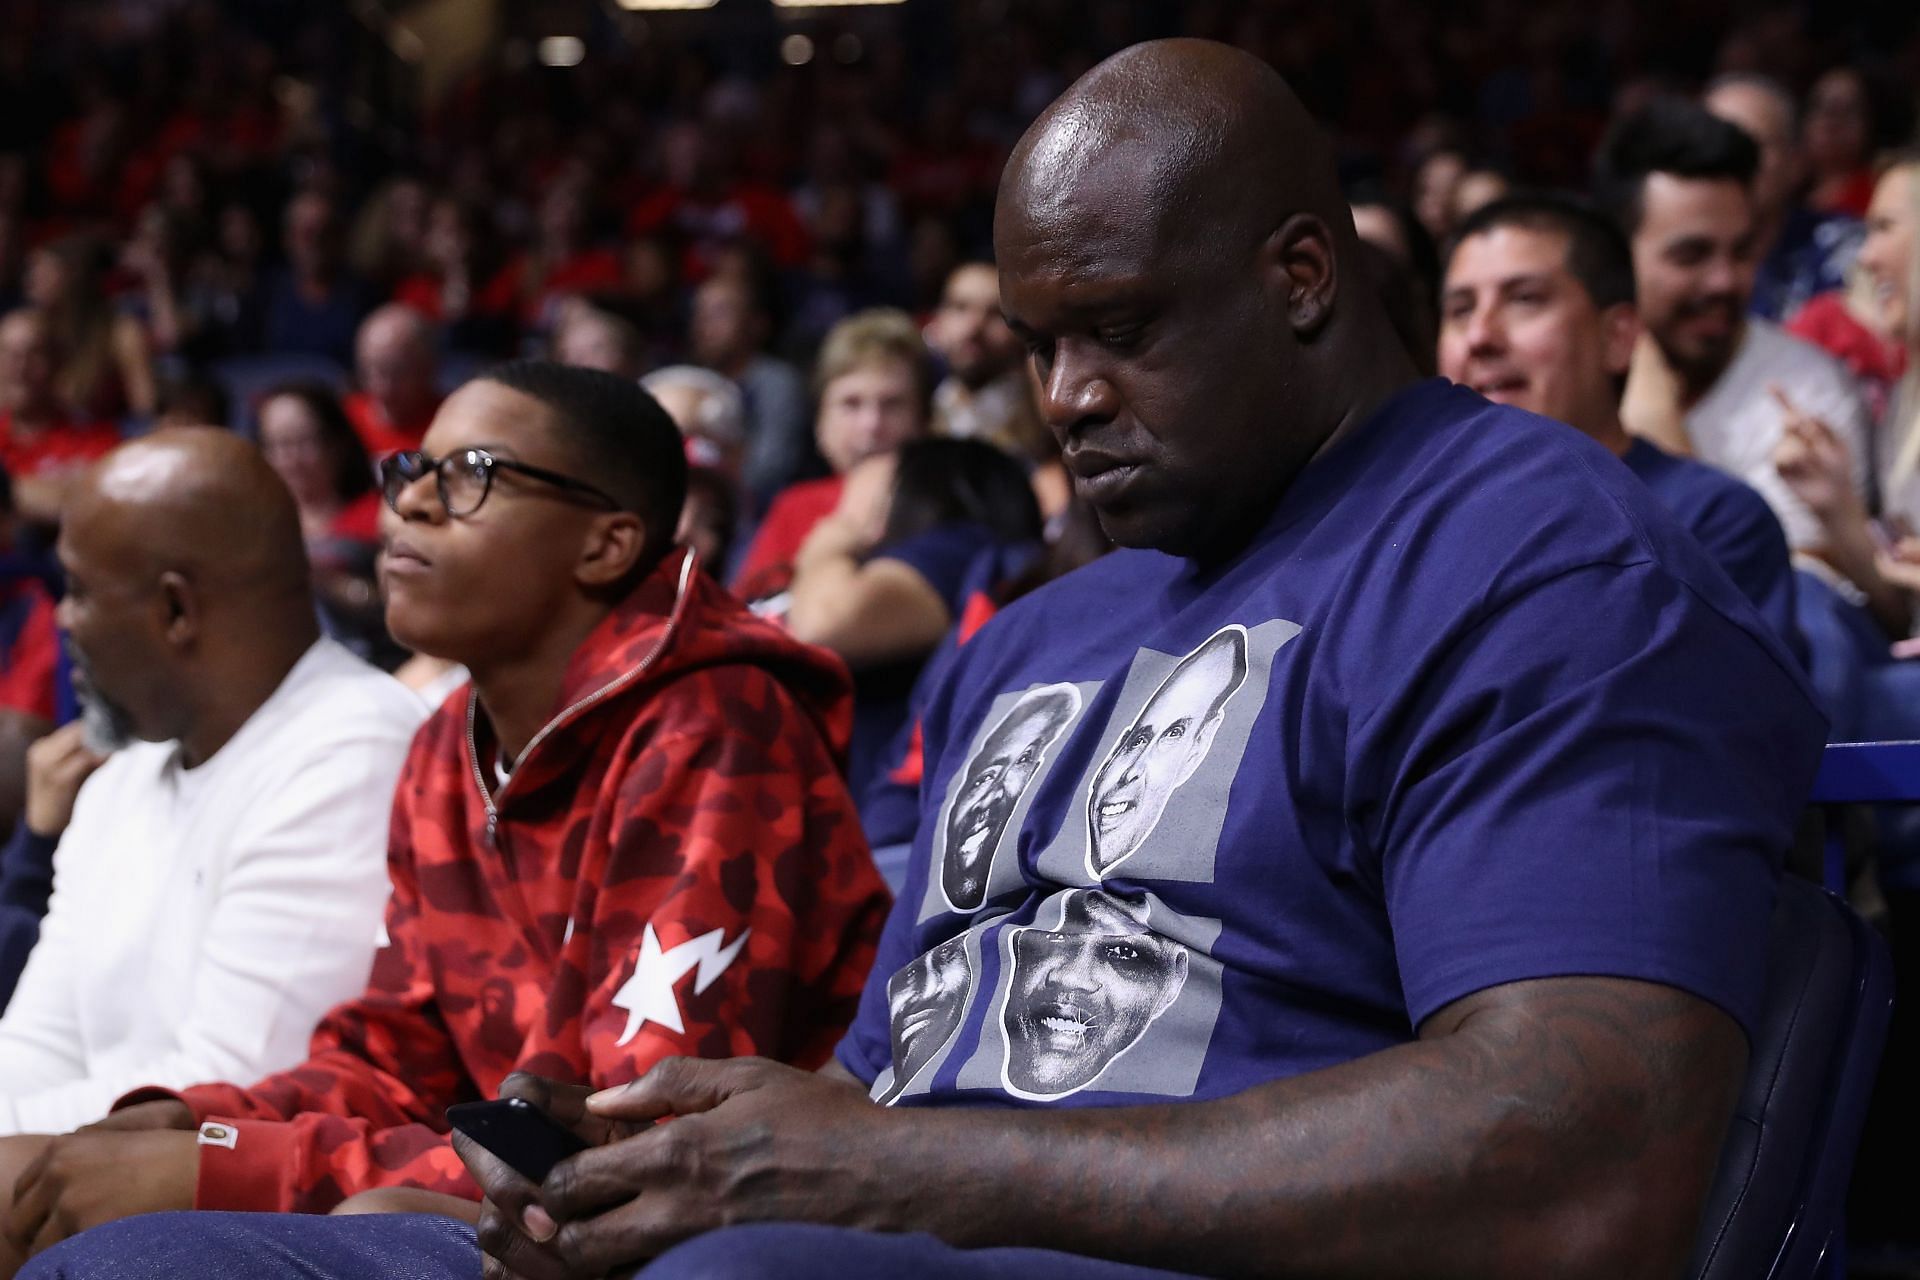 Shaq and his son in attendance for one of the games